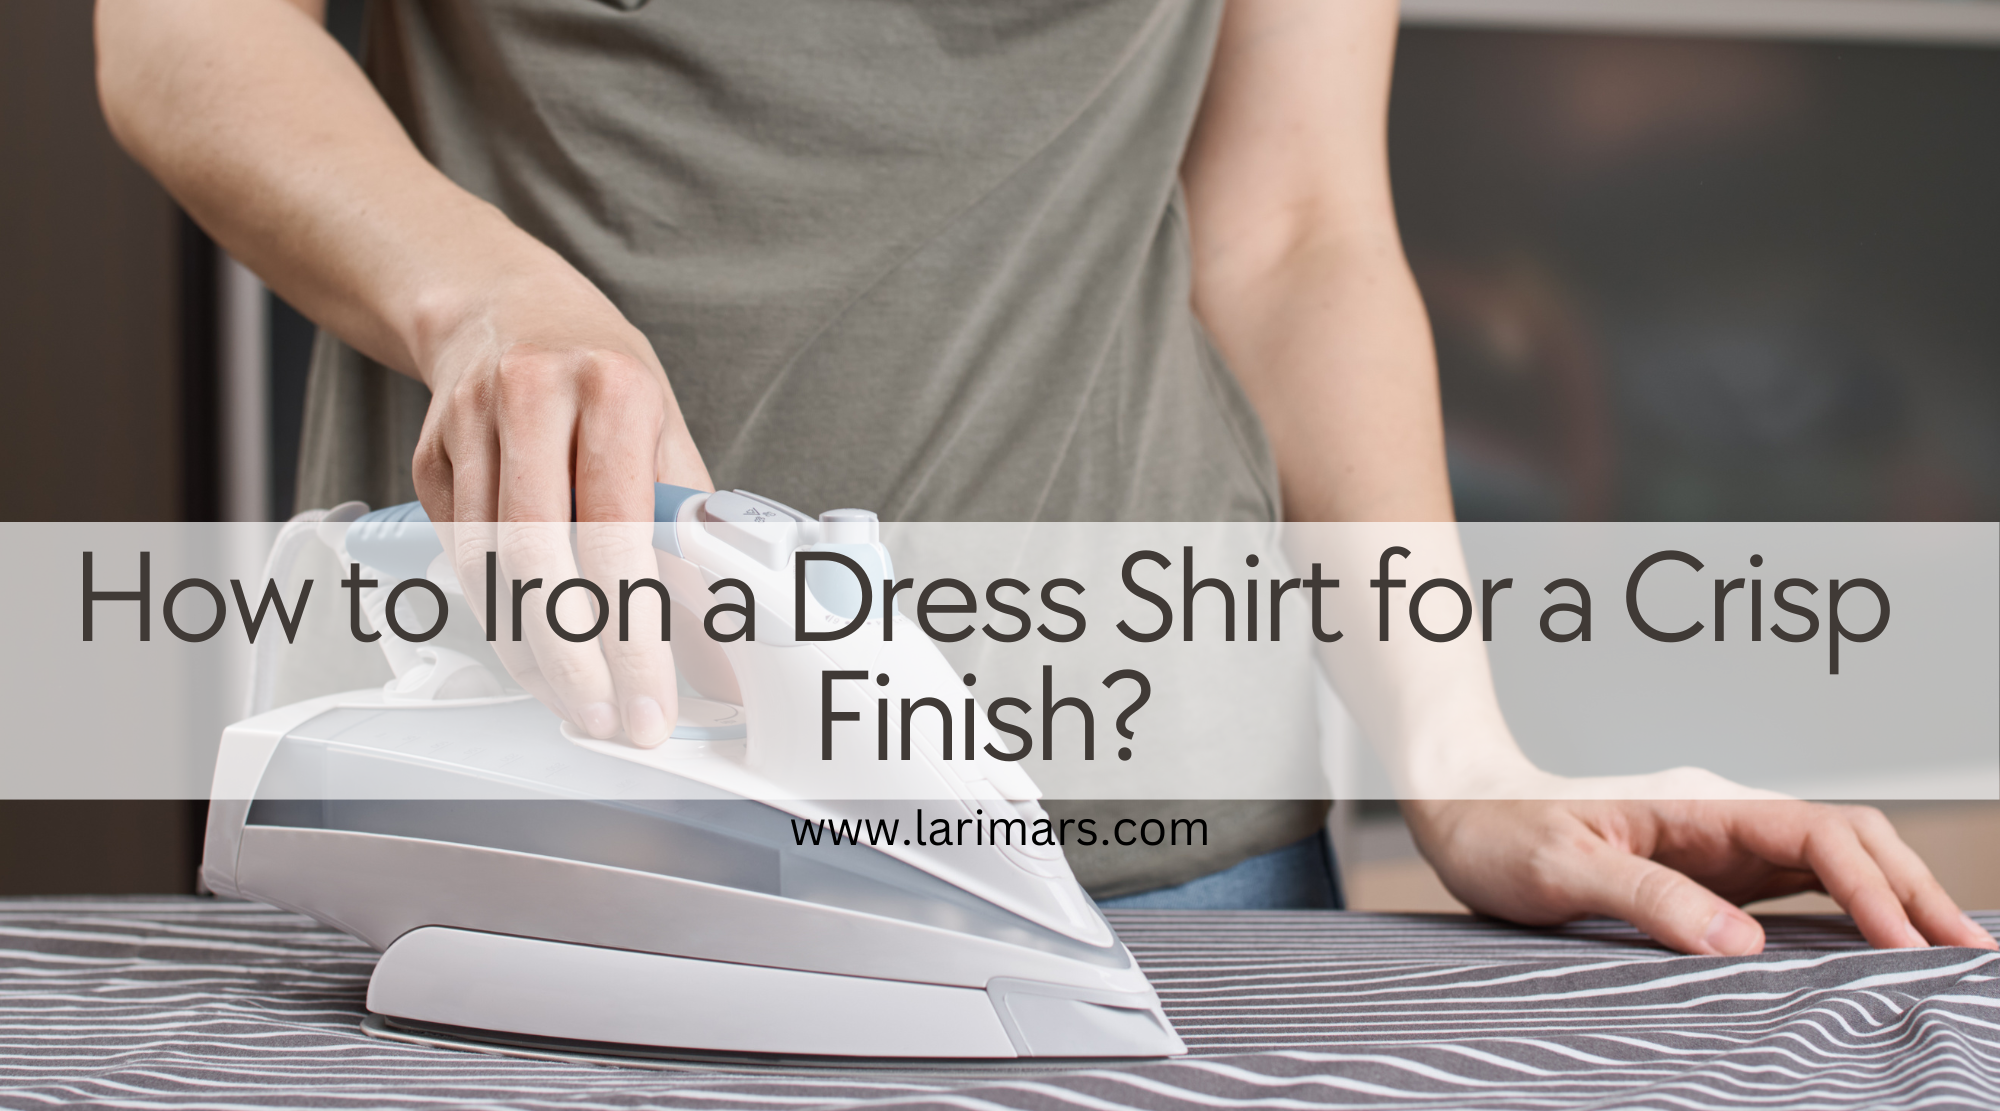 Step by Step Guide to Iron a Dress Shirt